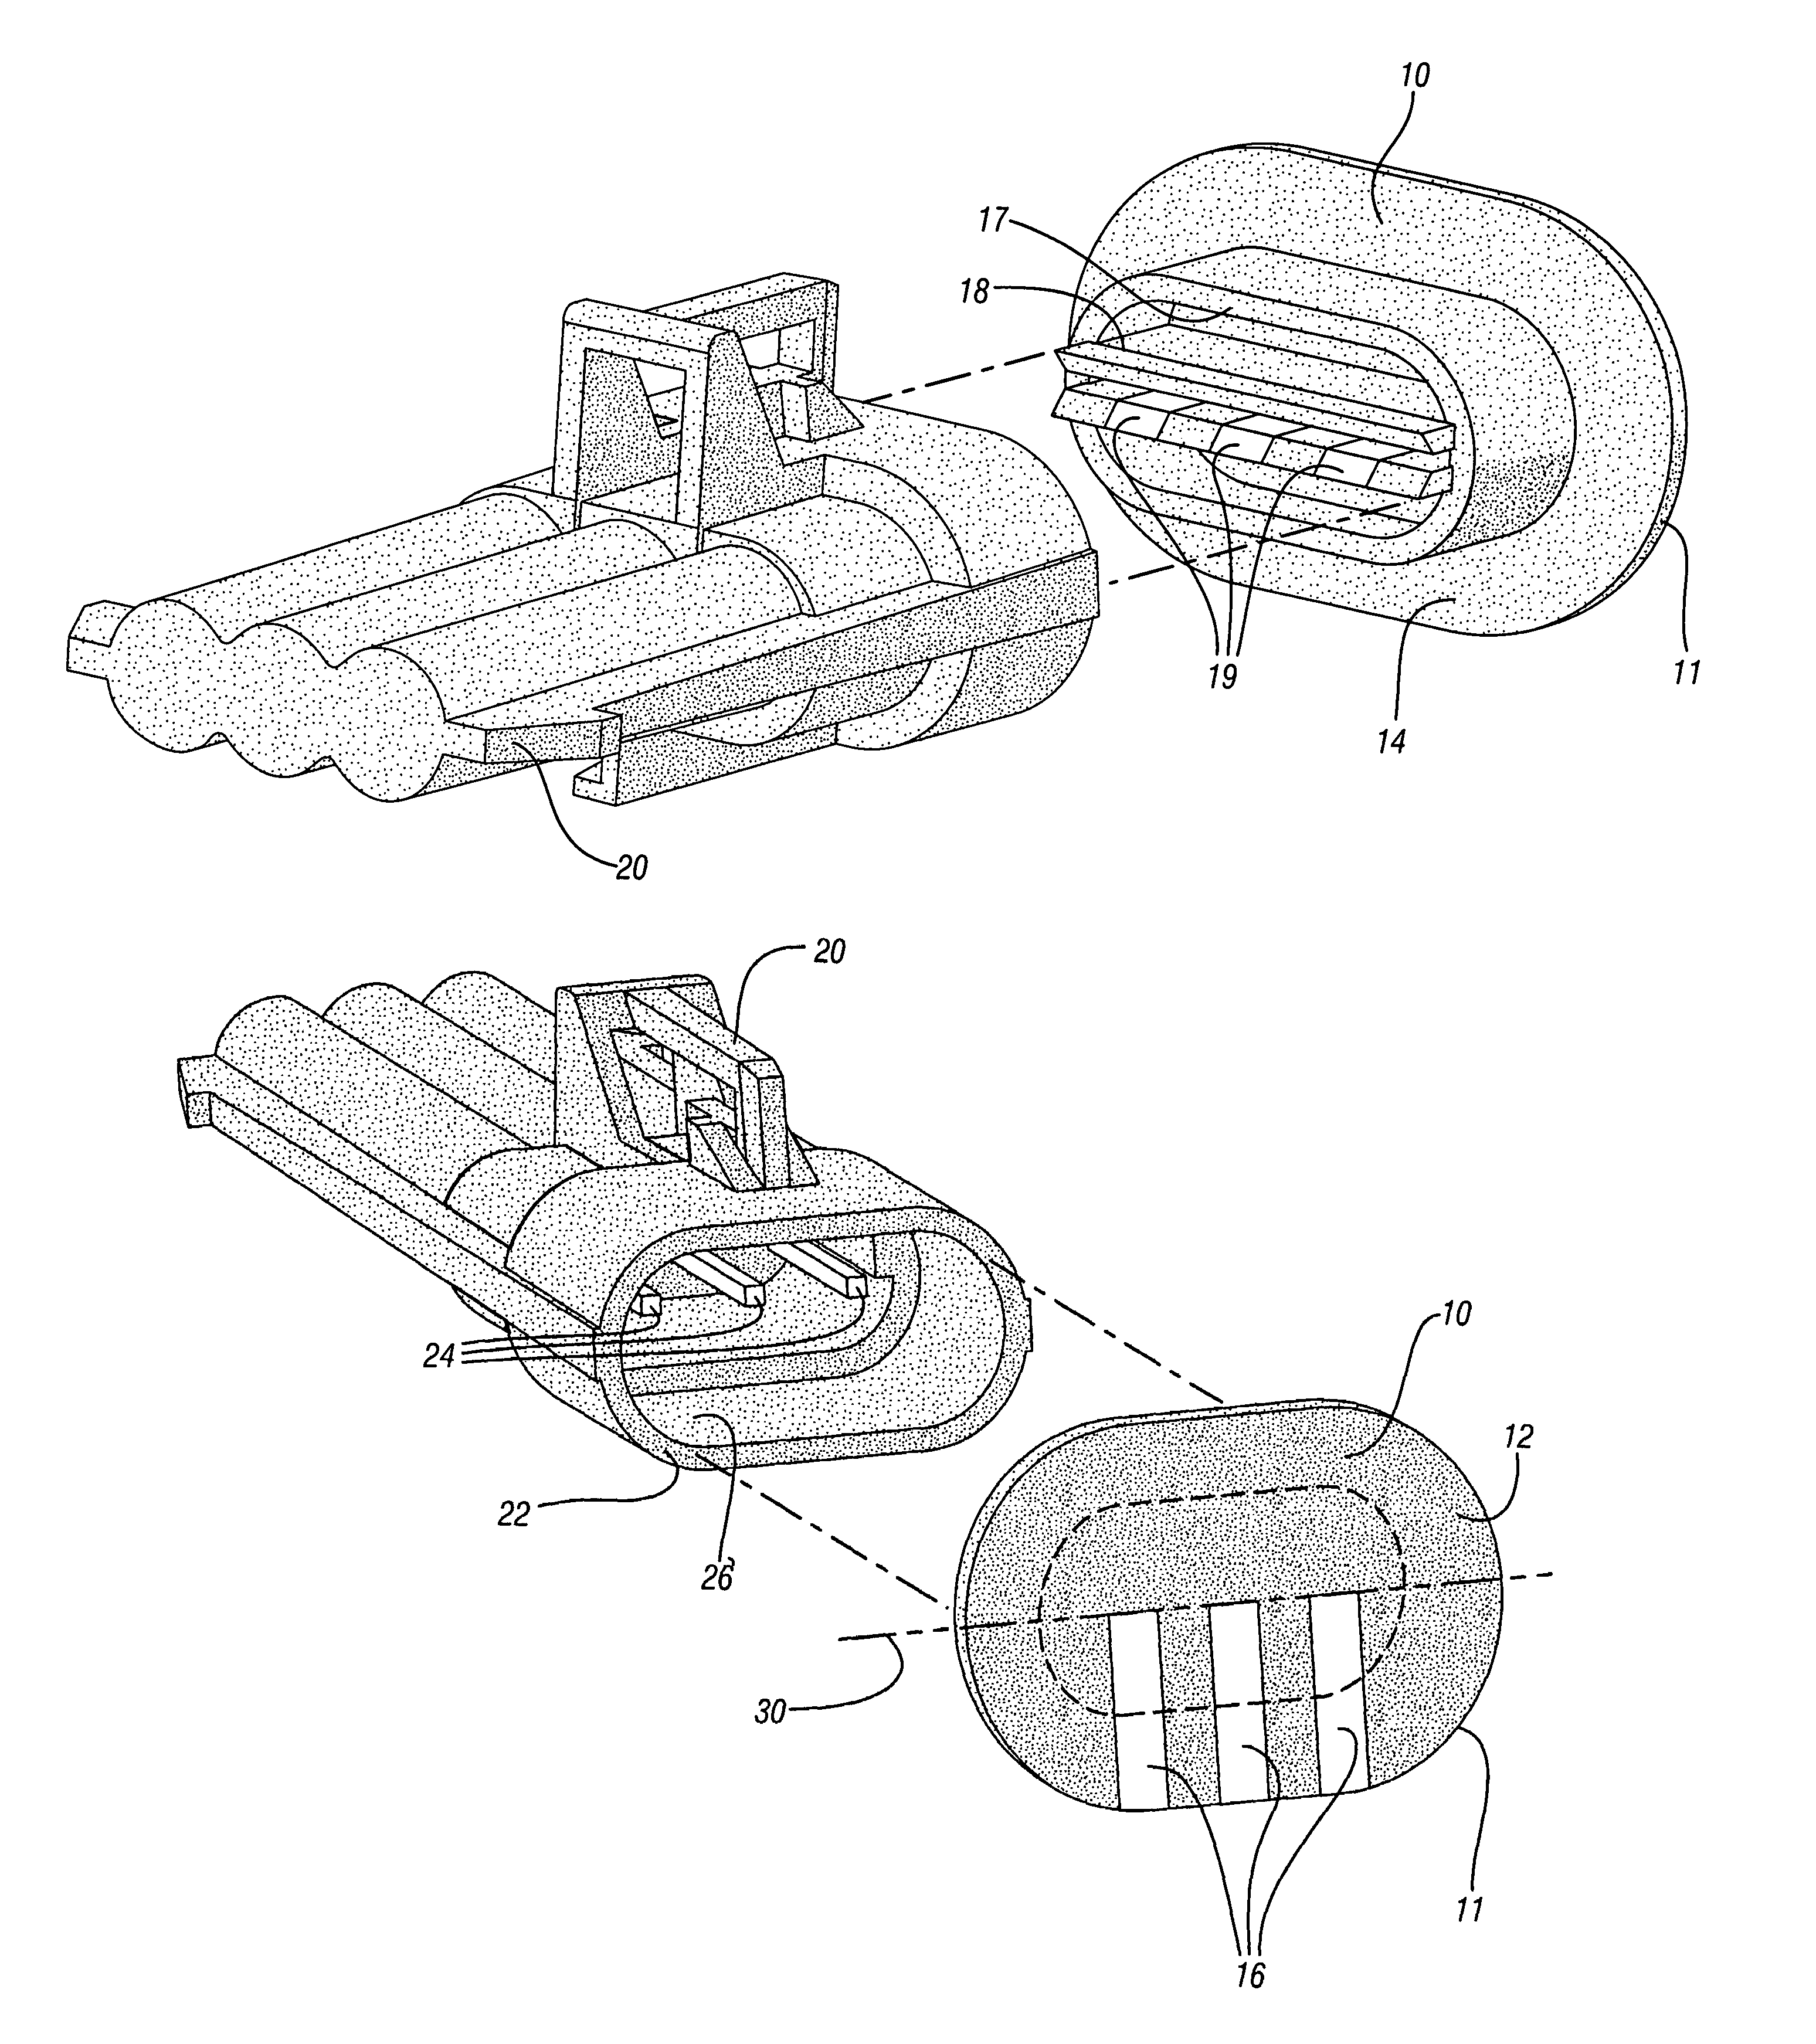 Cover device and method for electrical connector